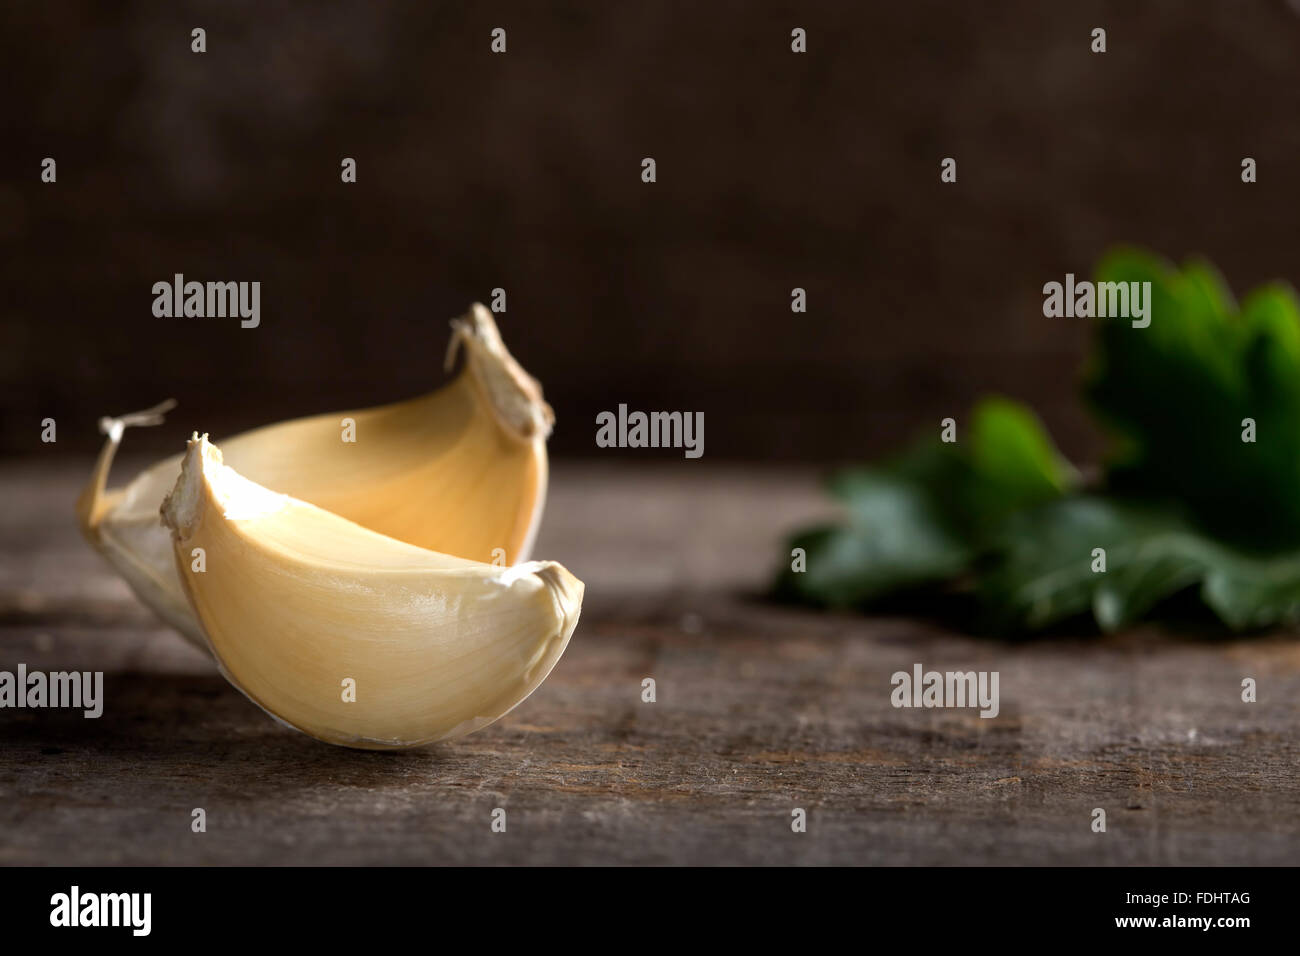 Fresh garlic on wooden table with parsley in background Stock Photo